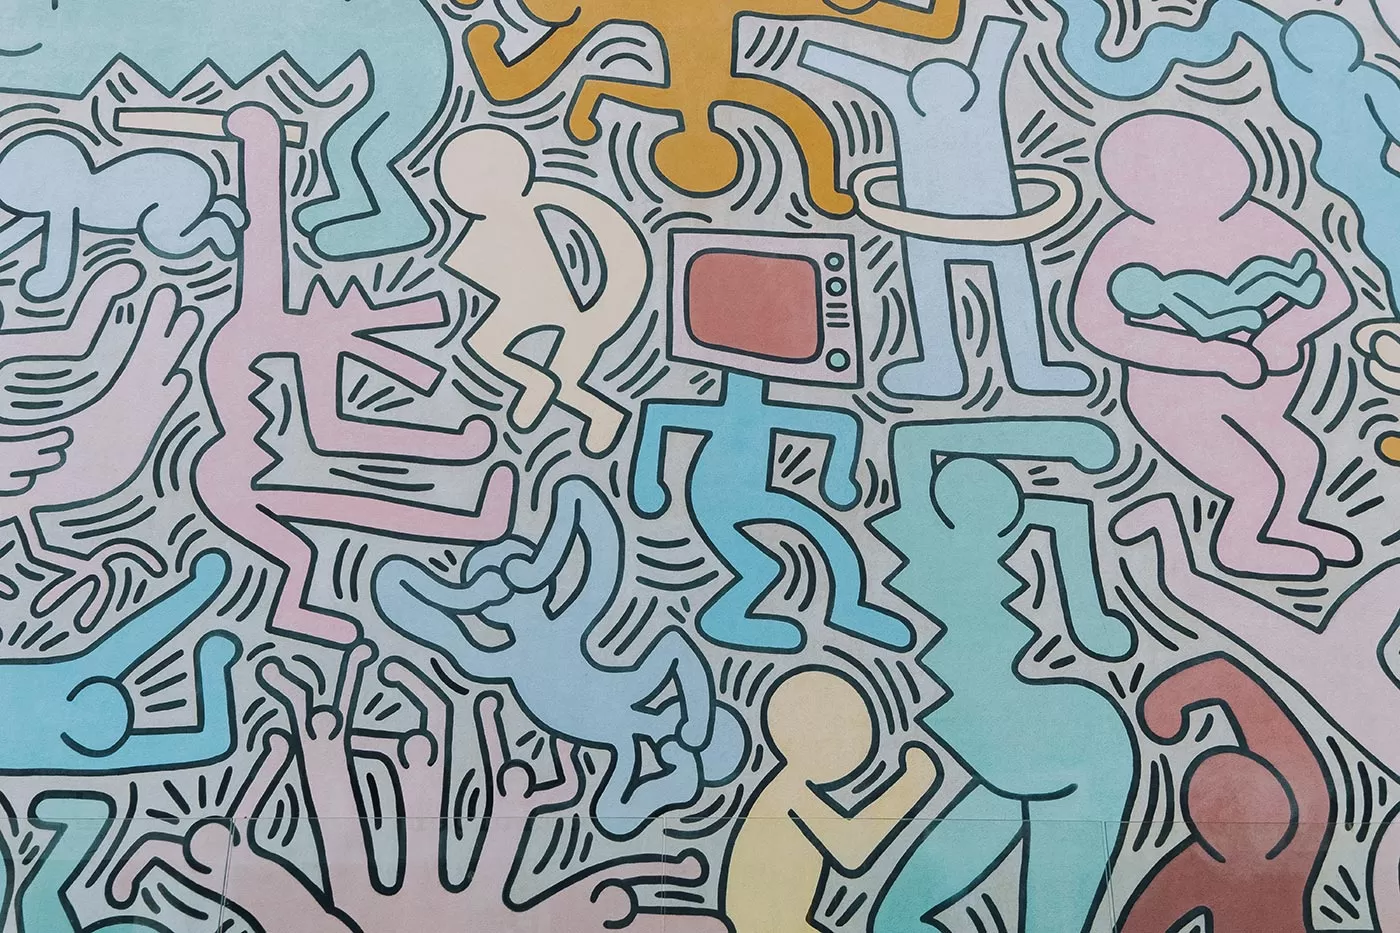 Things to do in Pisa Italy - 'Tuttomondo' Mural by Keith Haring